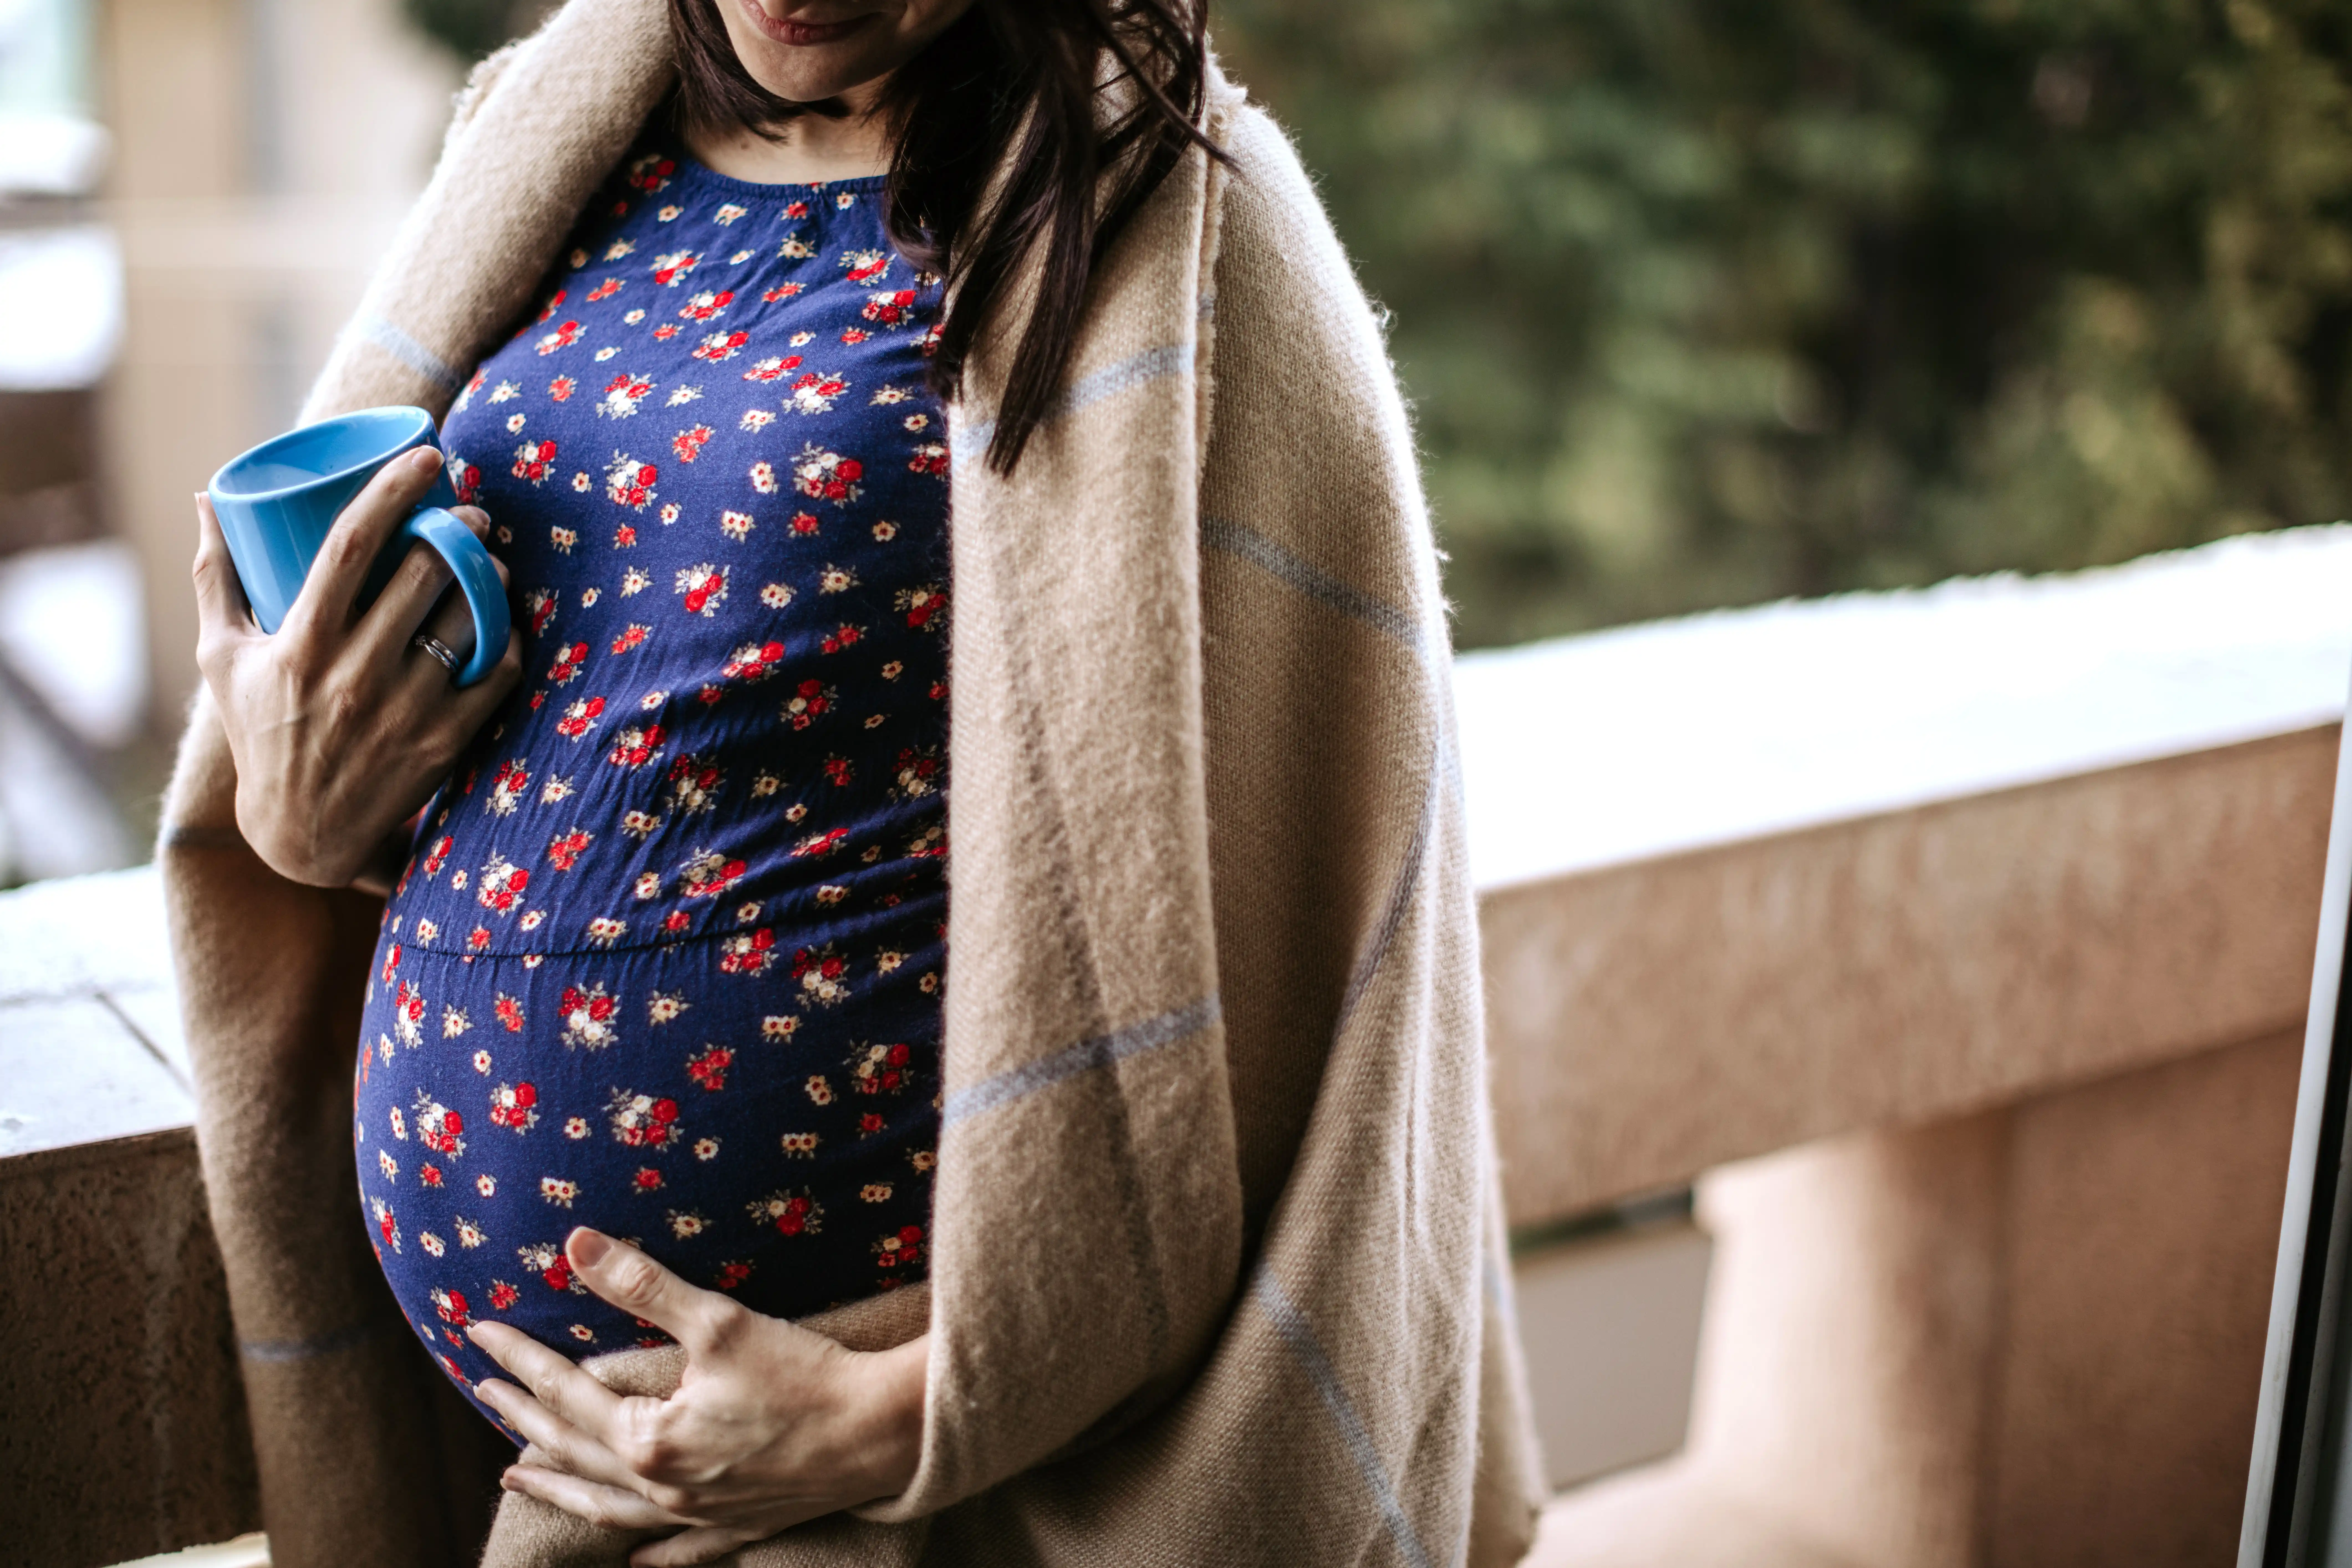 Pregnant woman holding her belly outside.